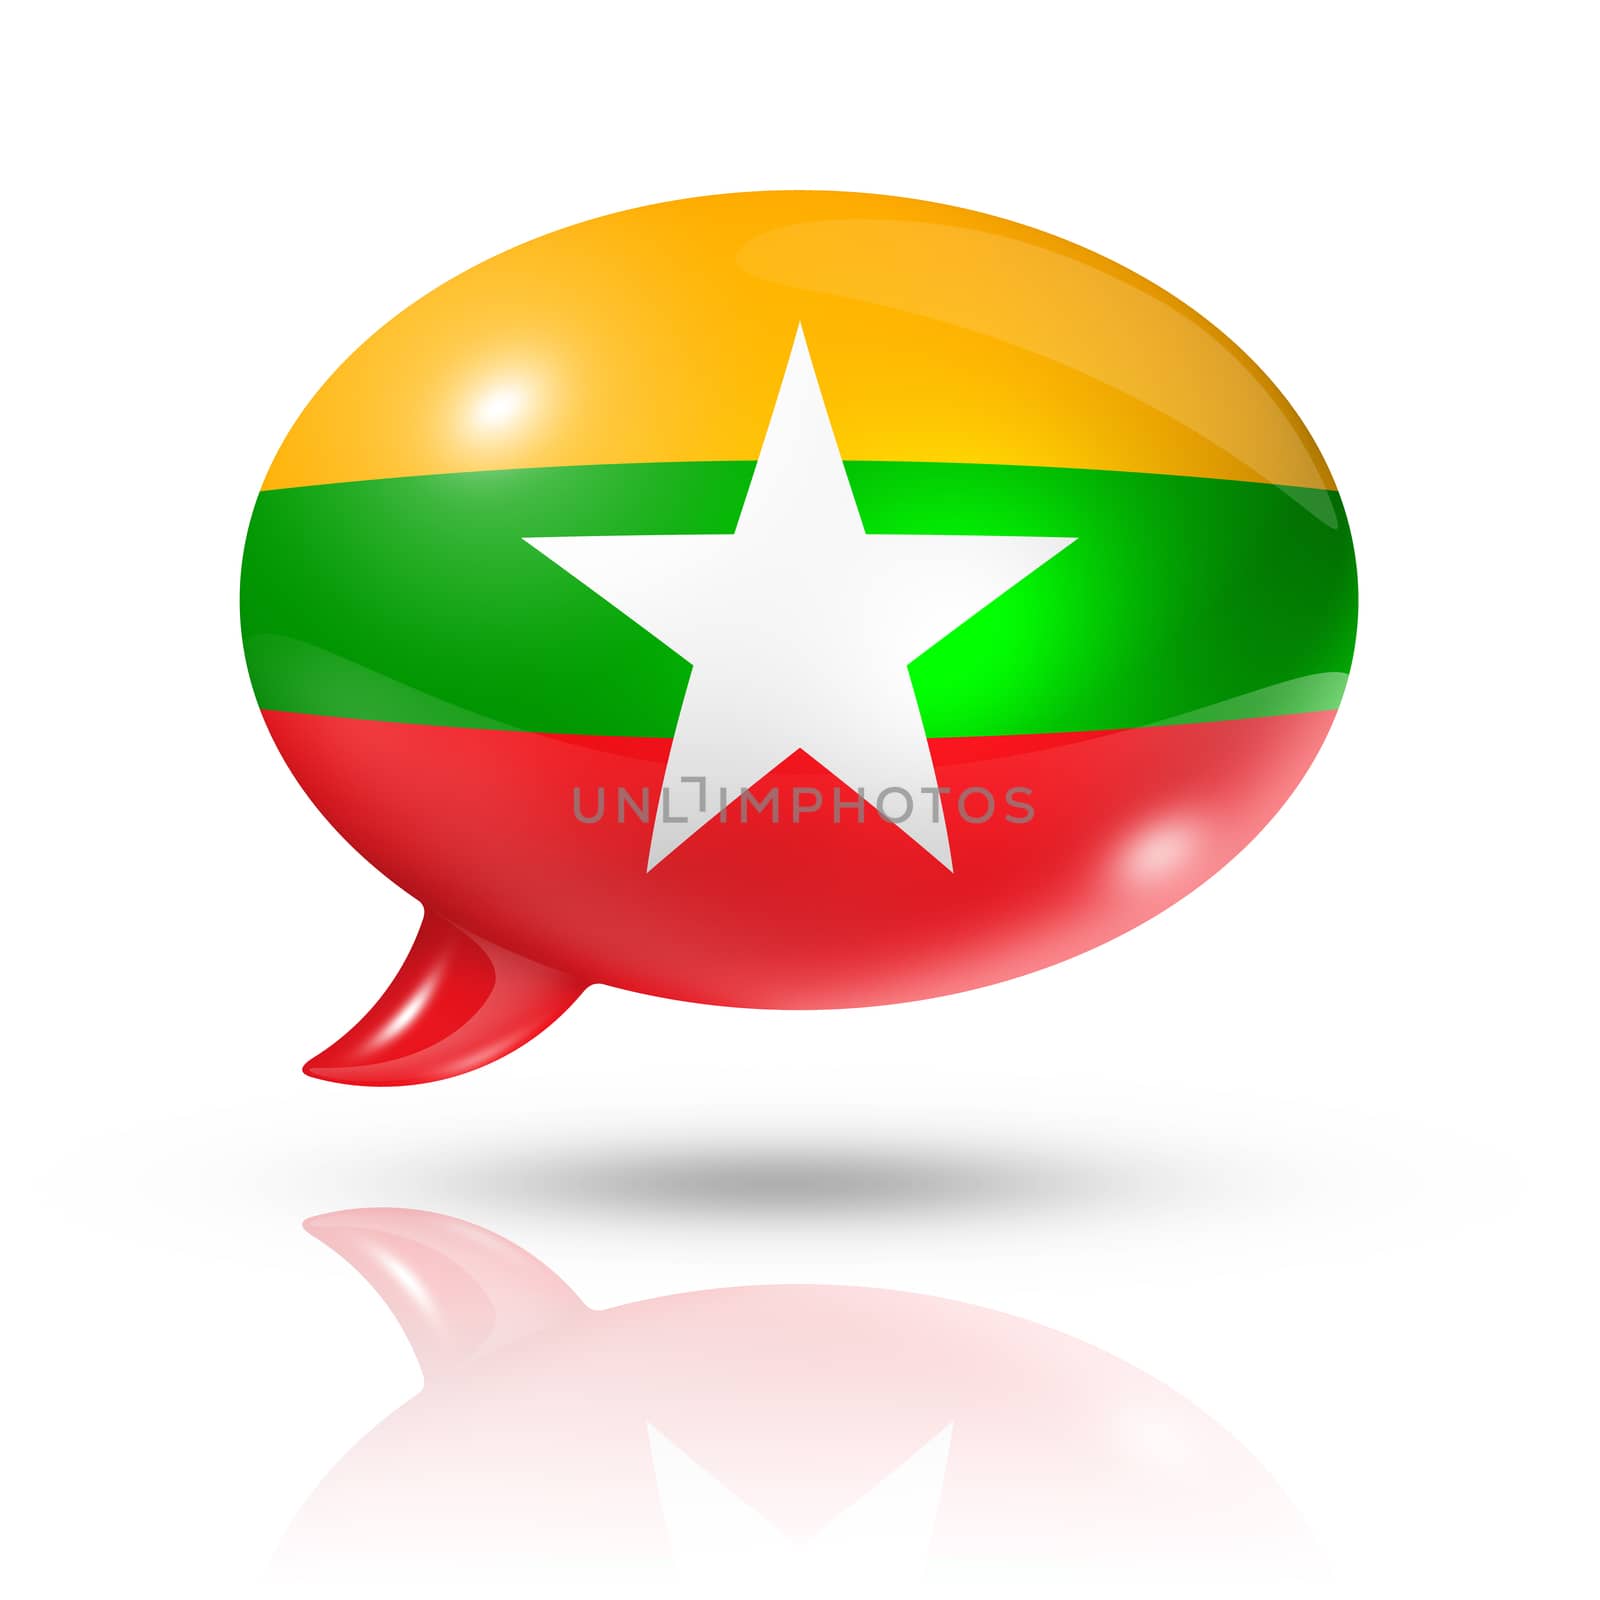 three dimensional Burma Myanmar flag in a speech bubble isolated on white with clipping path